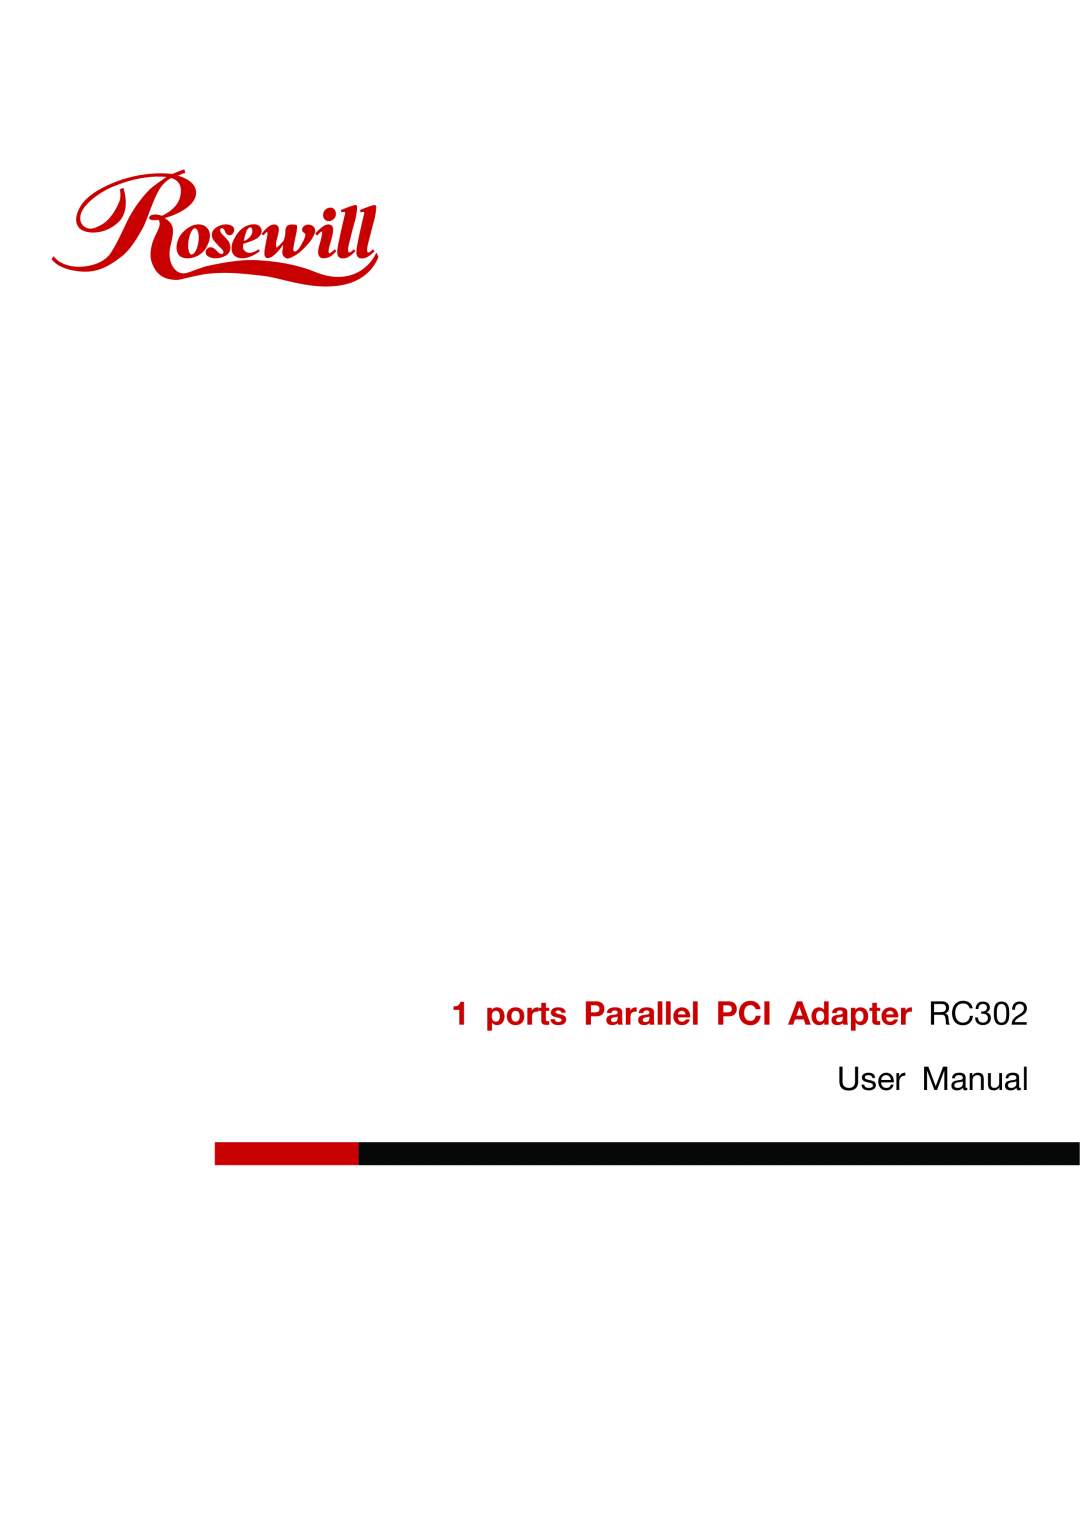 Rosewill RC-302 user manual ports Parallel PCI Adapter RC302, User Manual 